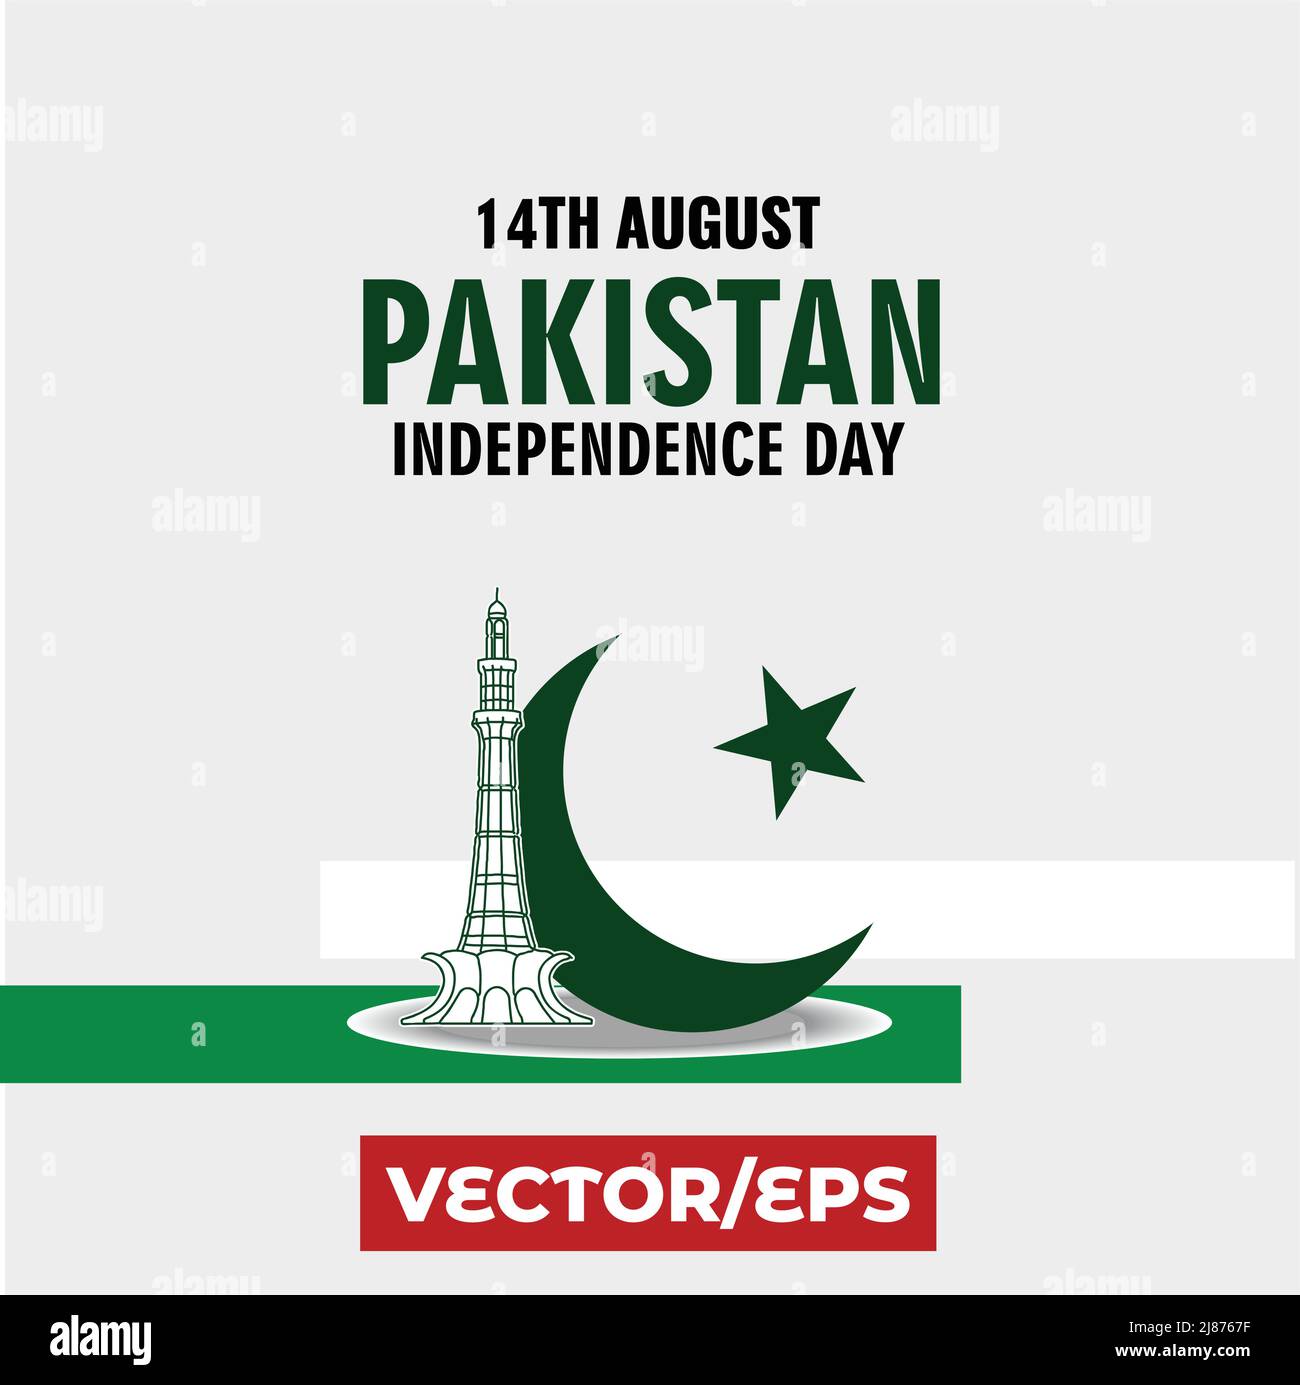 14th August 1947, Pakistan independence day, Lahore Fort Stock Vector